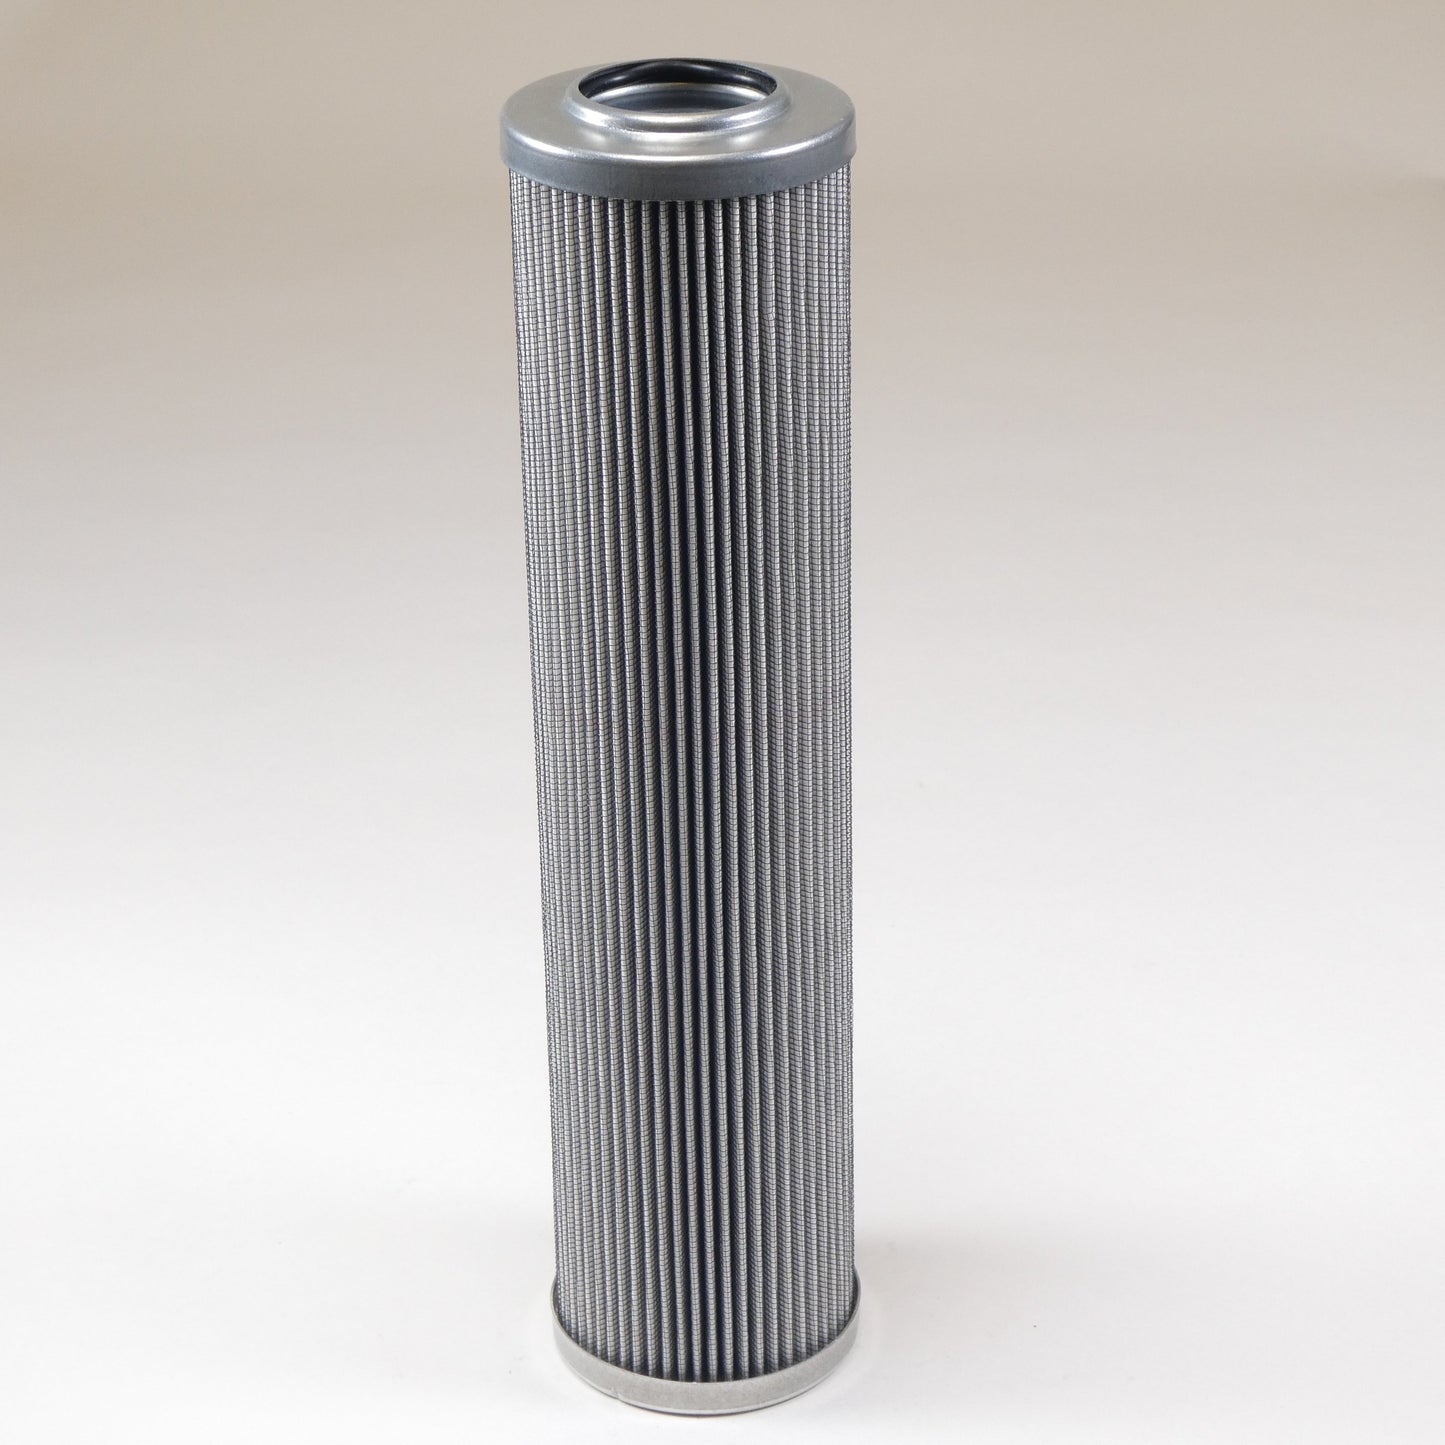 Hydrafil Replacement Filter Element for Hilco 3830-03-038-C